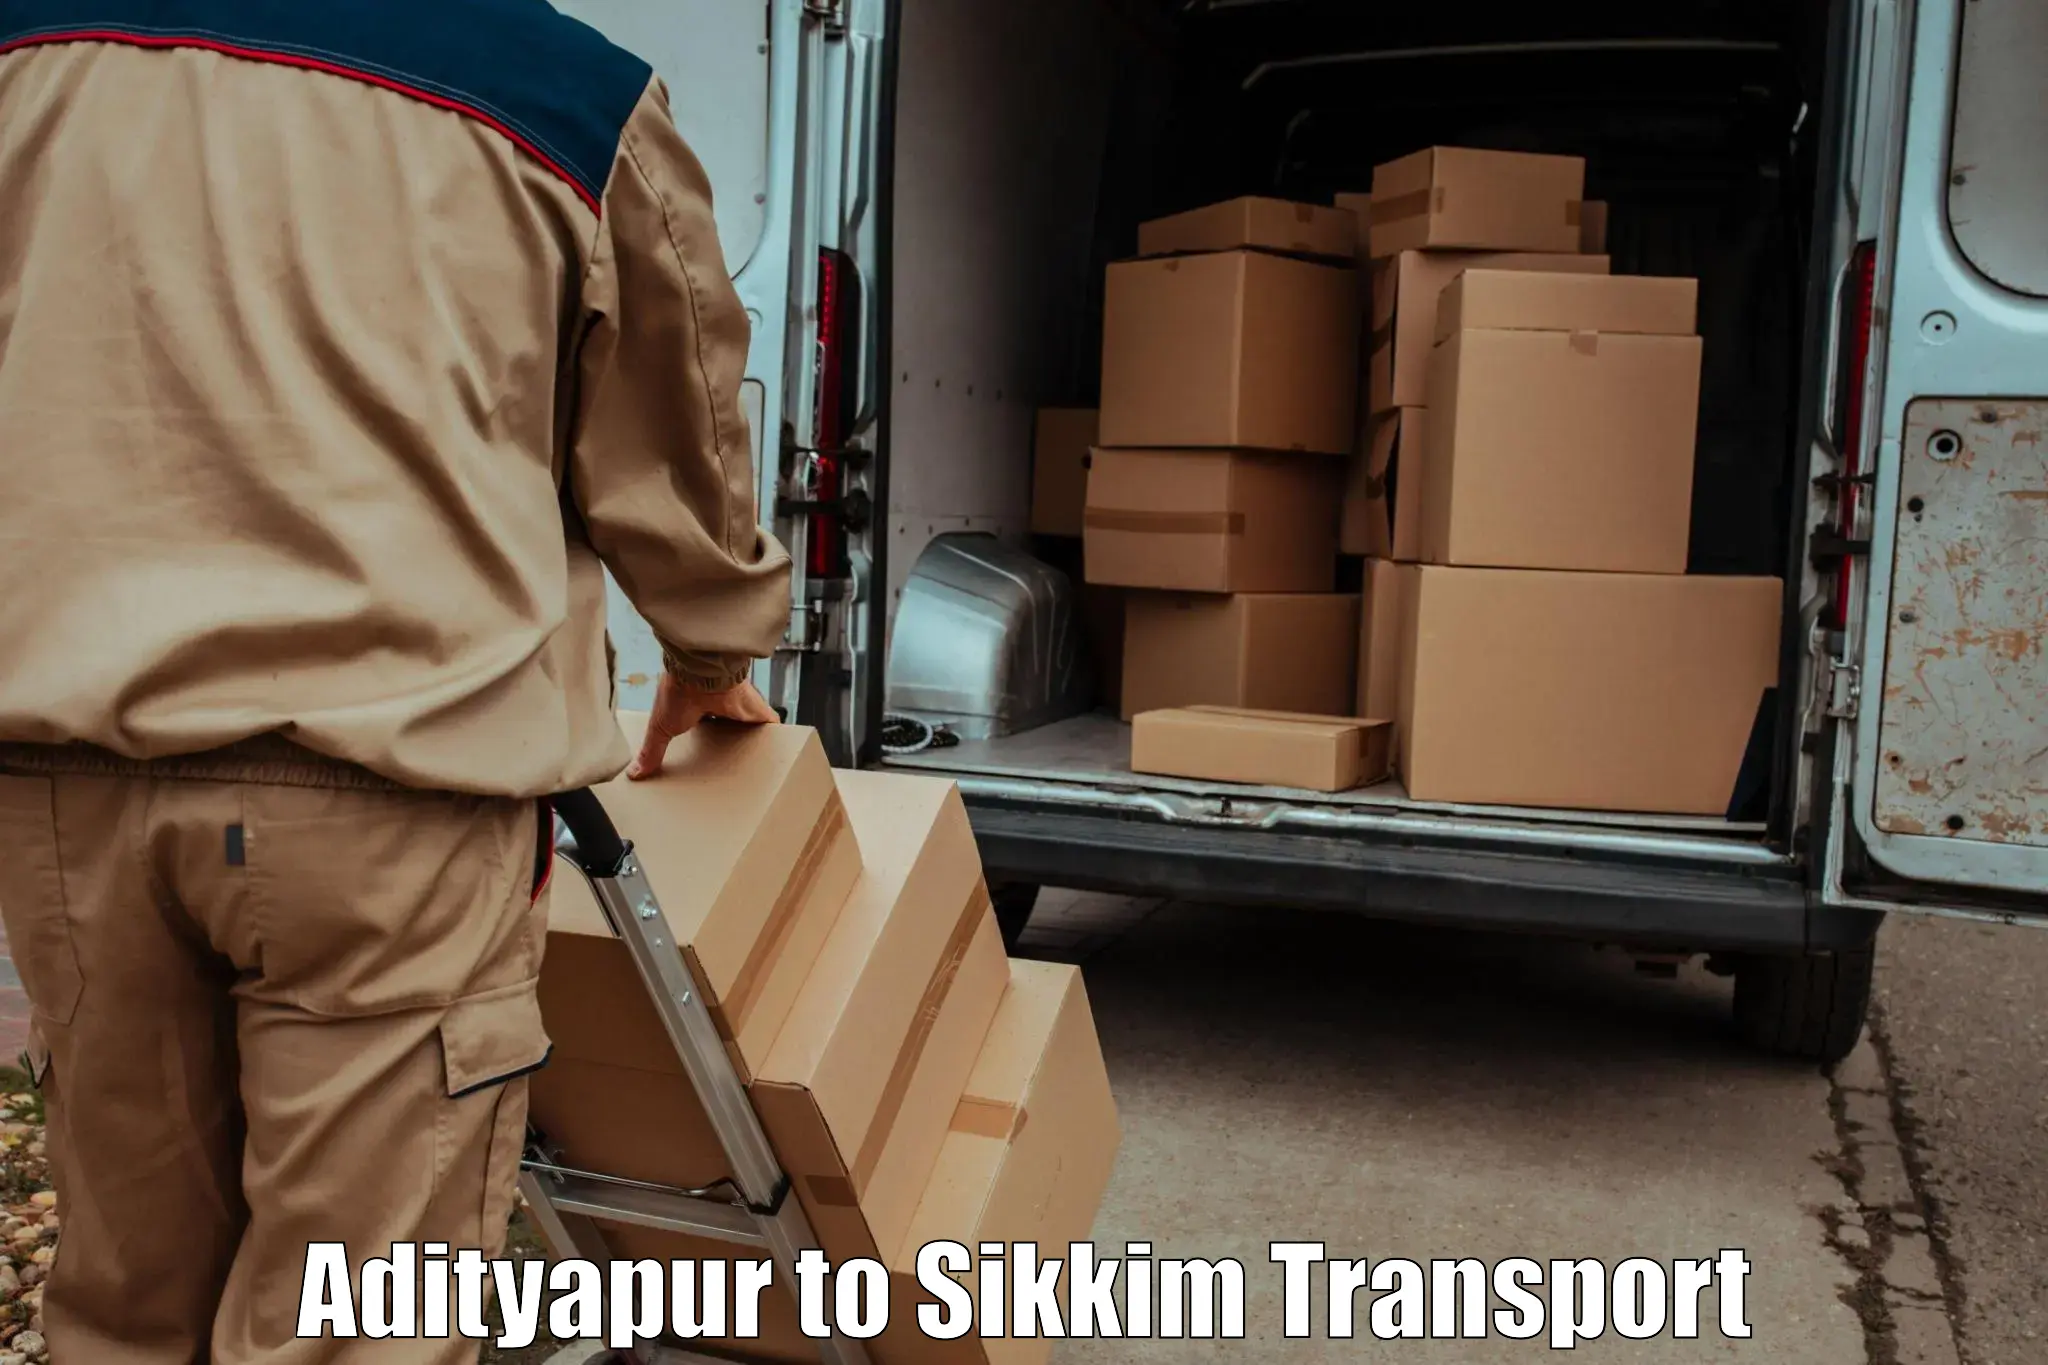 Daily parcel service transport Adityapur to Pelling